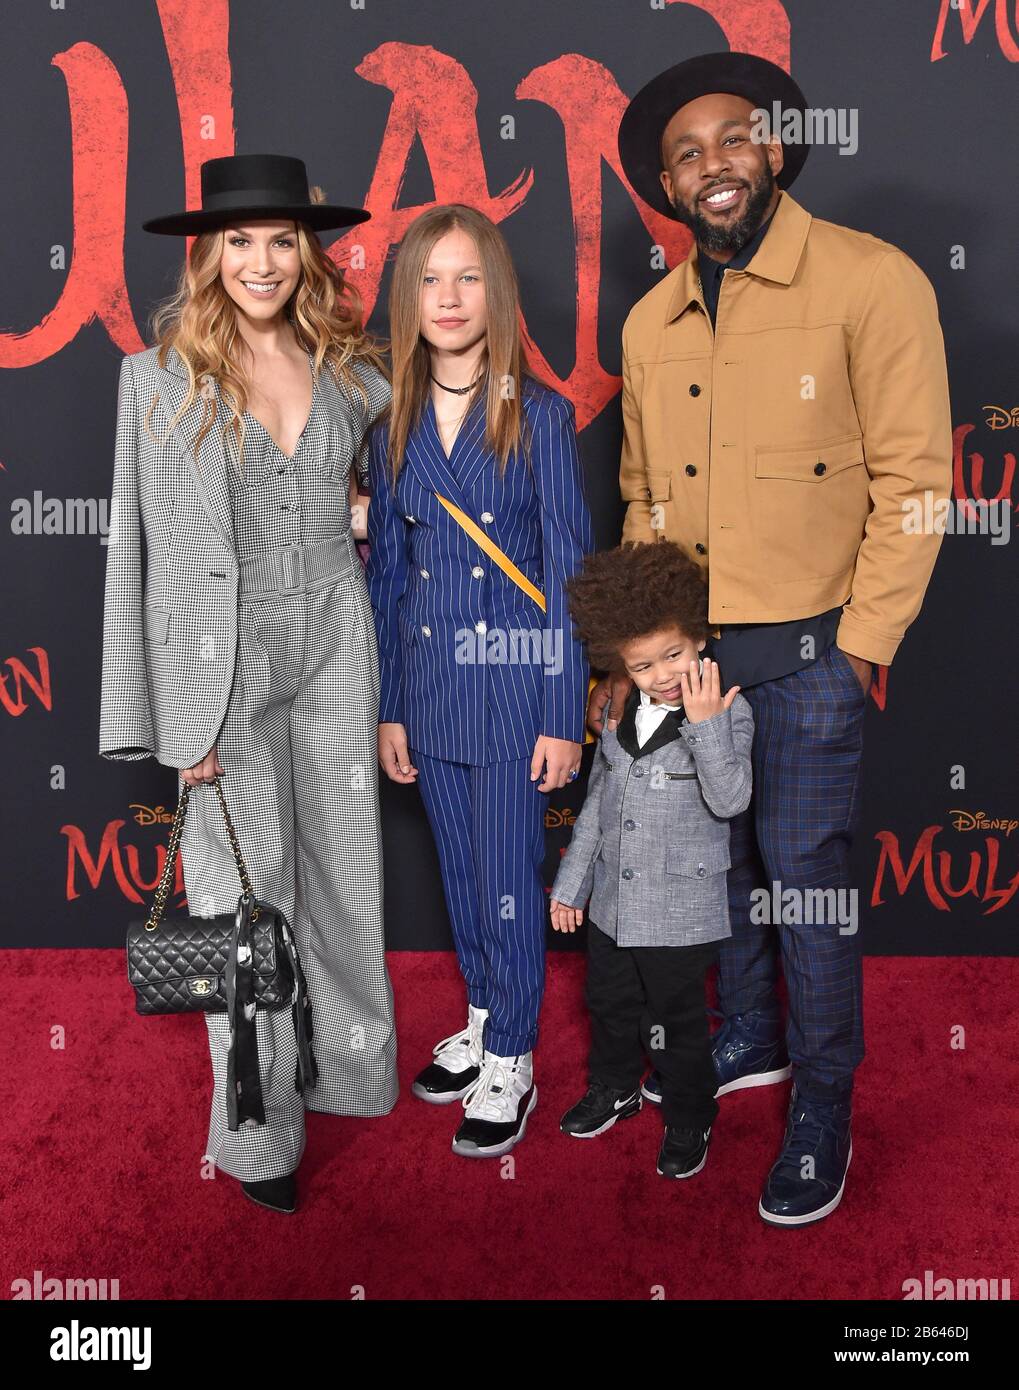 March 9, 2020, Hollywood, California, USA: Allison Holker, Weslie Fowler, Maddox Laurel Boss and Stephen 'tWitch' Boss arrives for the premiere of the film â€˜Mulanâ€™ at the Dolby Theatre. (Credit Image: © Lisa O'Connor/ZUMA Wire) Stock Photo